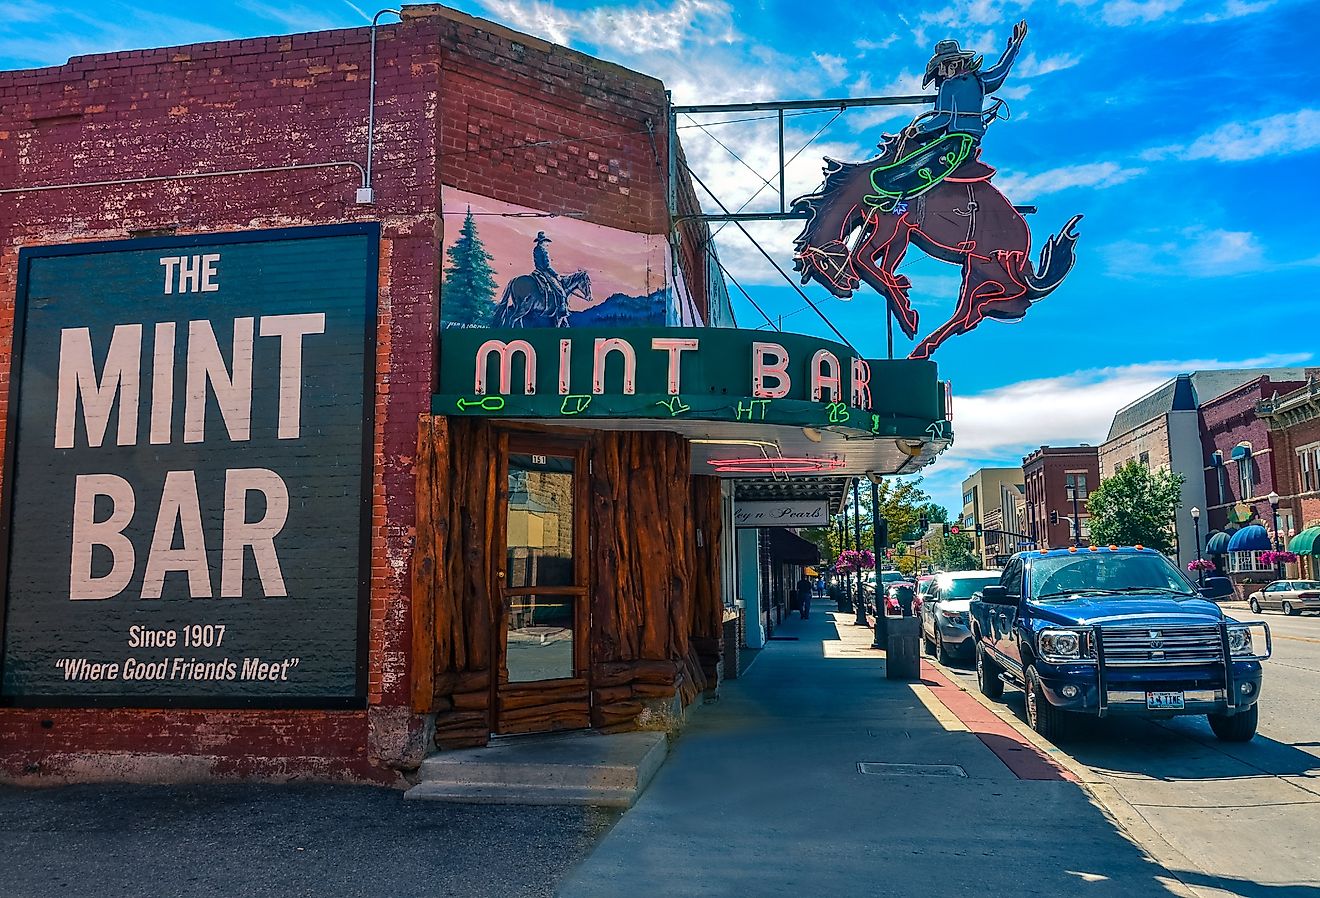 Wyoming's legendary meeting place, the Mint Bar is Sheridan's oldest bar. Image credit Sandra Foyt via Shutterstock